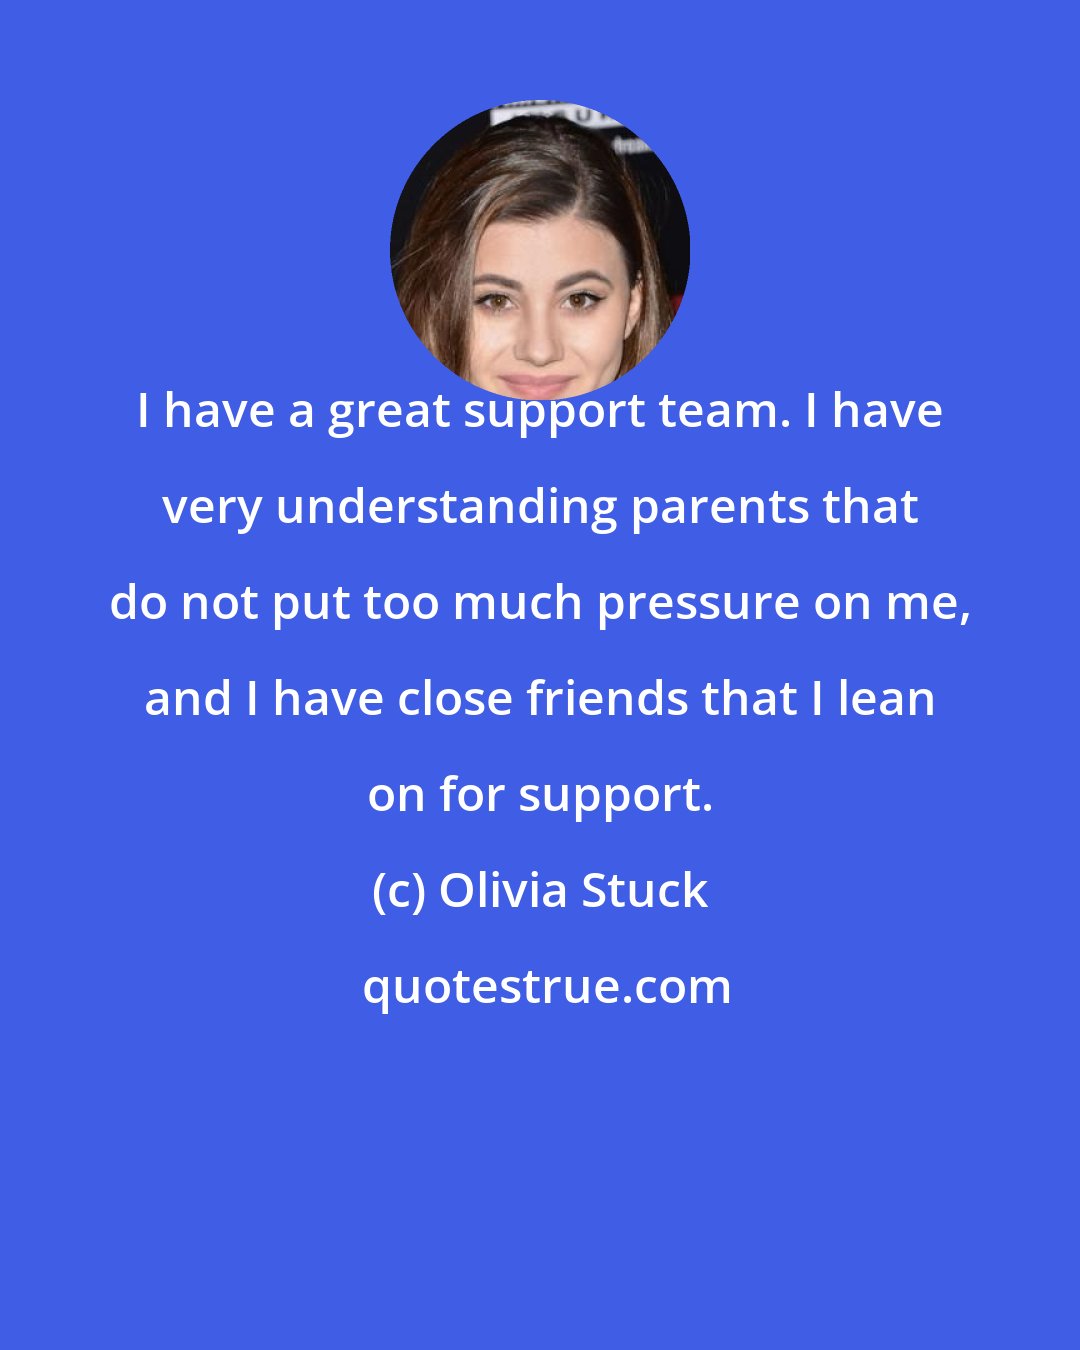 Olivia Stuck: I have a great support team. I have very understanding parents that do not put too much pressure on me, and I have close friends that I lean on for support.